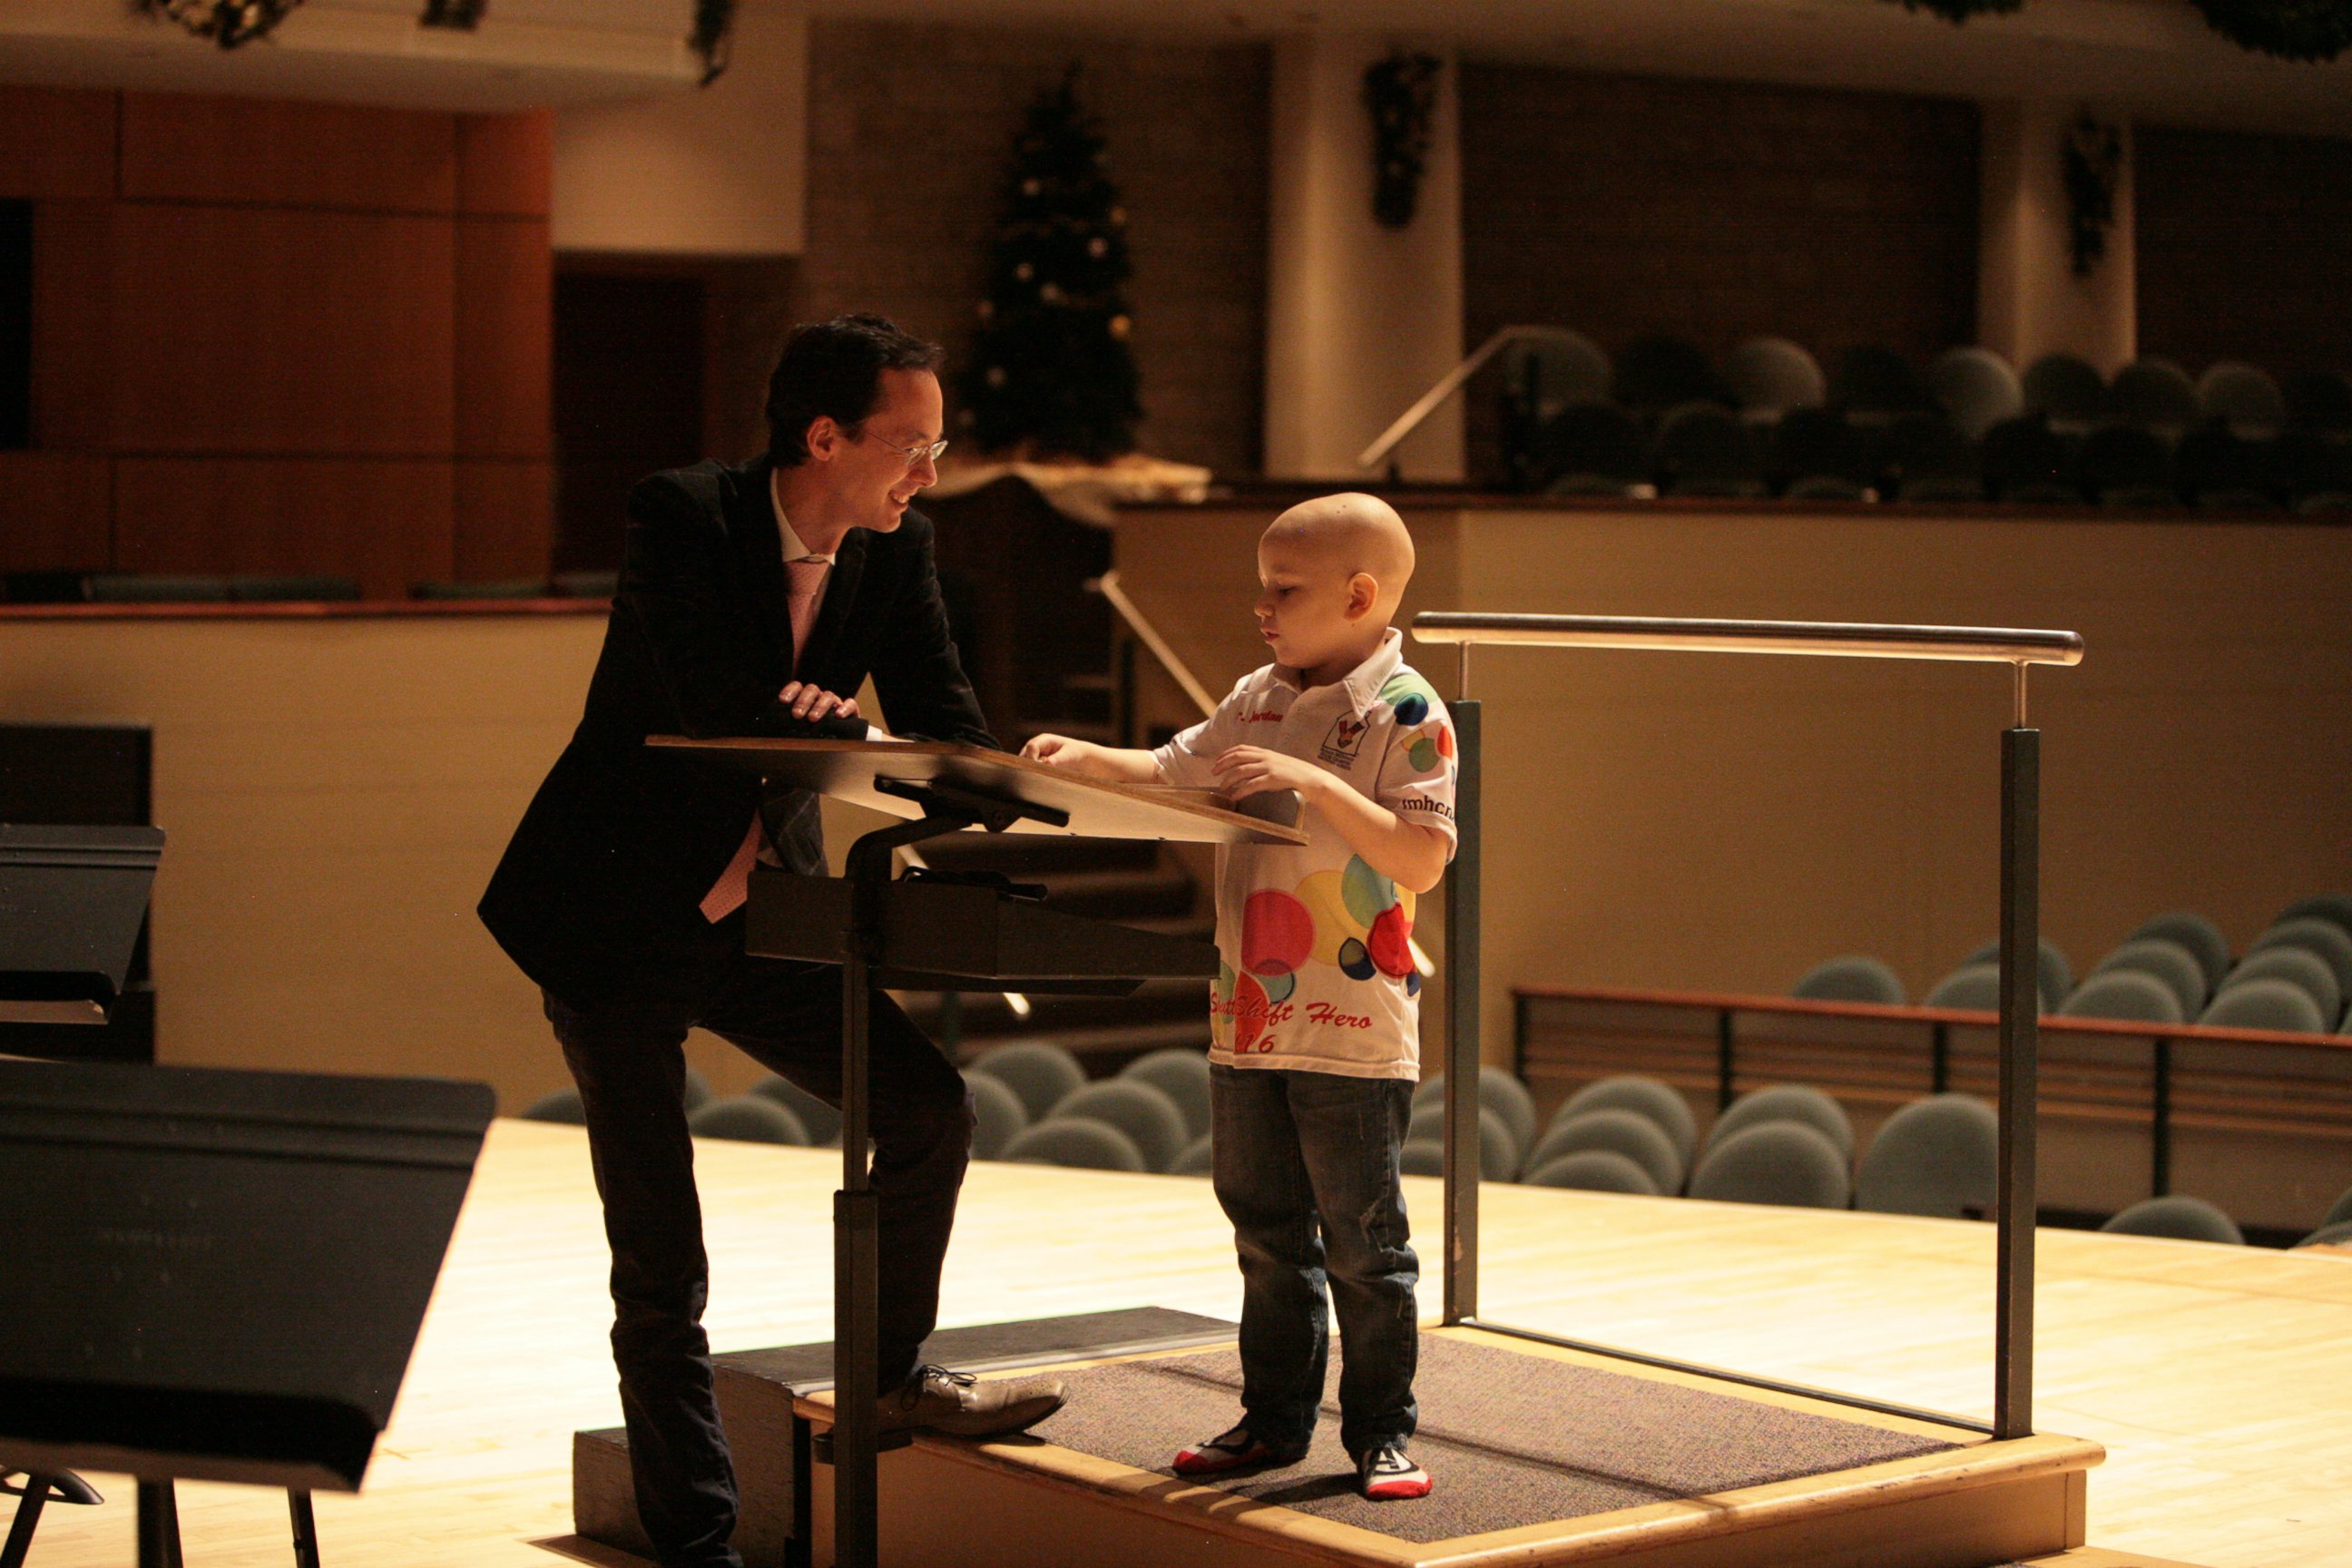 PHOTO: Jordan Cartwright, a 7-year-old boy battling leukemia, fulfilled his dream of conducting an orchestra on Dec. 19, 2016, when he got to conduct the Edmonton Symphony Orchestra at the Francis Winspear Center for Music in Edmonton, Alberta, Canada. 